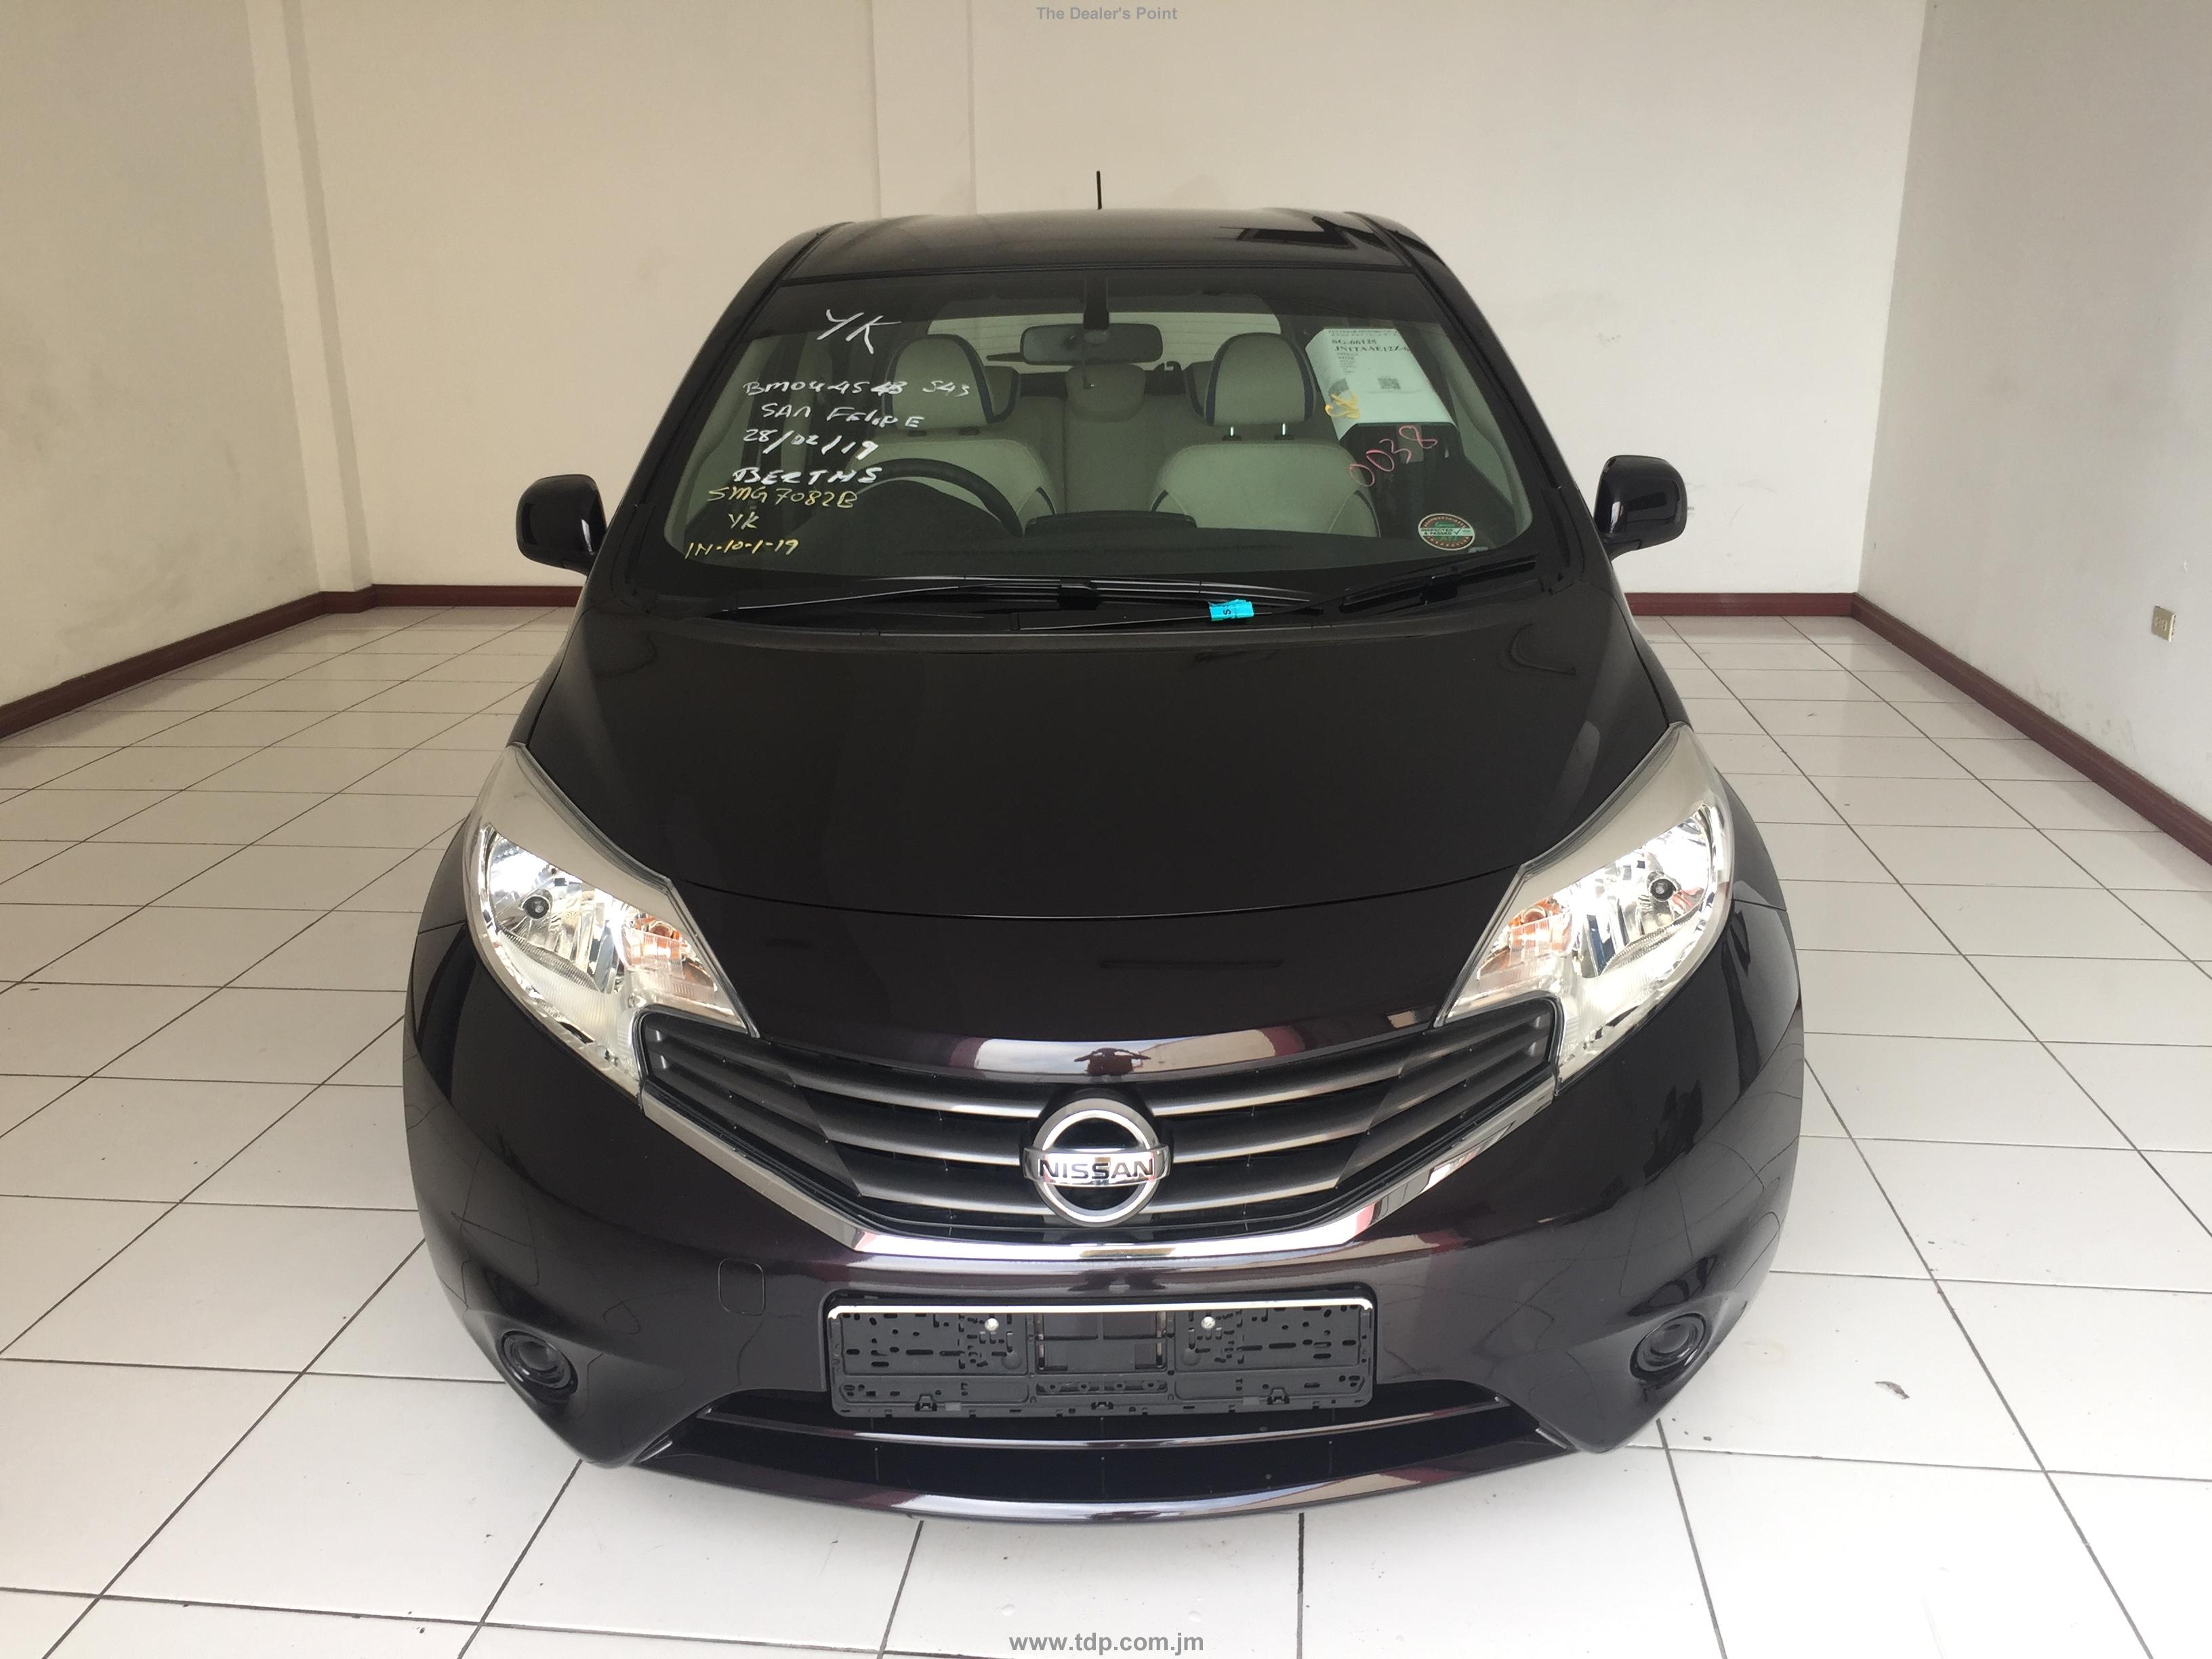 NISSAN NOTE 2014 Image 1